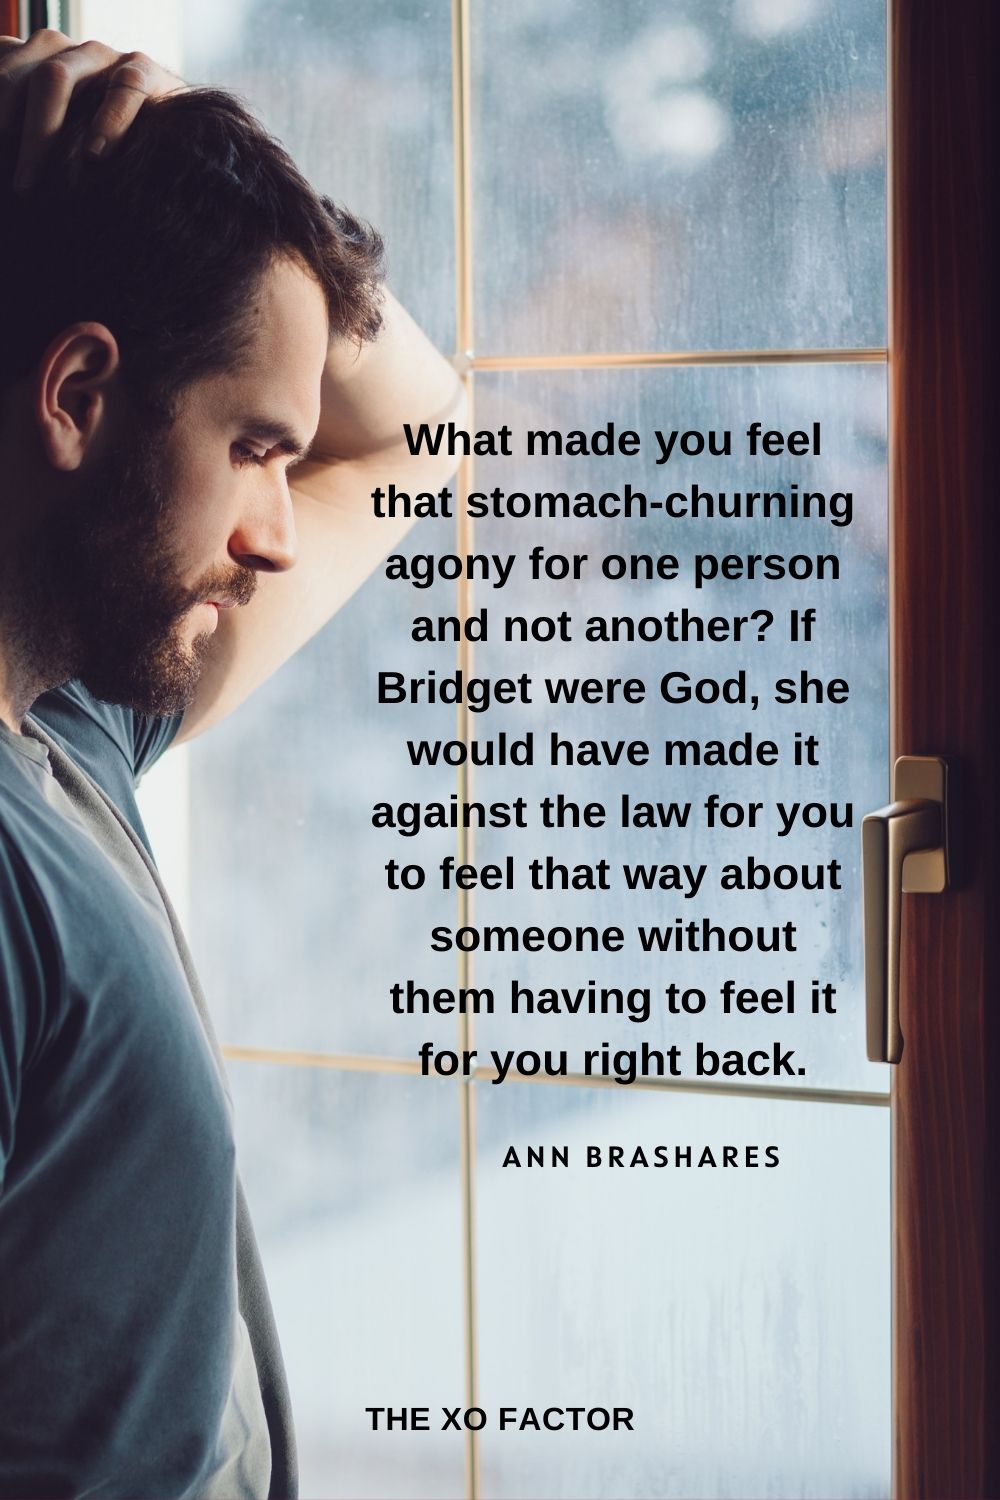 What made you feel that stomach-churning agony for one person and not another? If Bridget were God, she would have made it against the law for you to feel that way about someone without them having to feel it for you right back. Ann Brashares